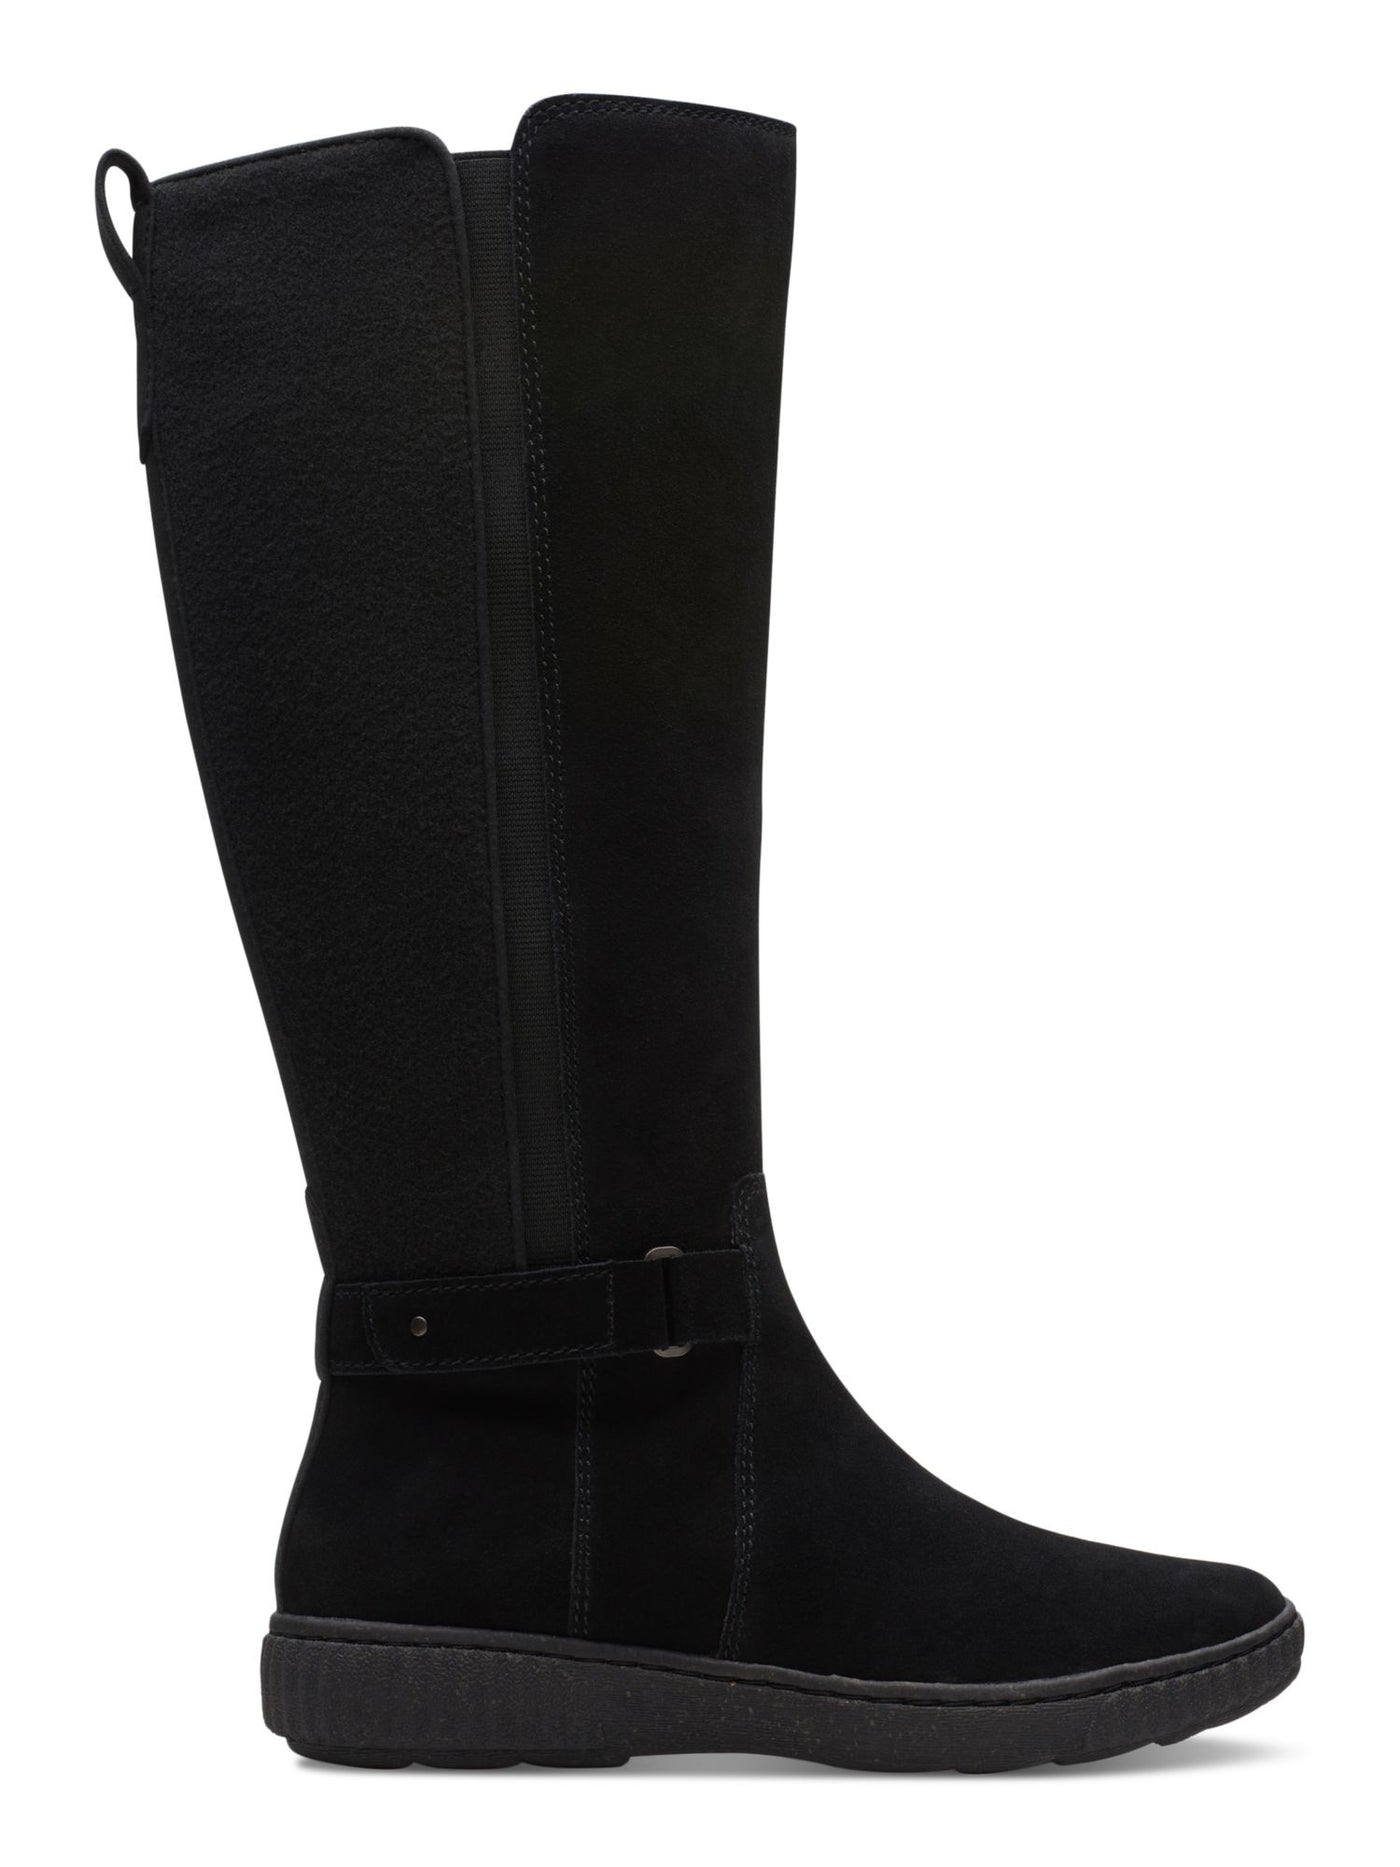 COLLECTION BY CLARKS Womens Black Goring Pull Tab Cushioned Button Accent Caroline Round Toe Platform Zip-Up Leather Riding Boot 6.5 M